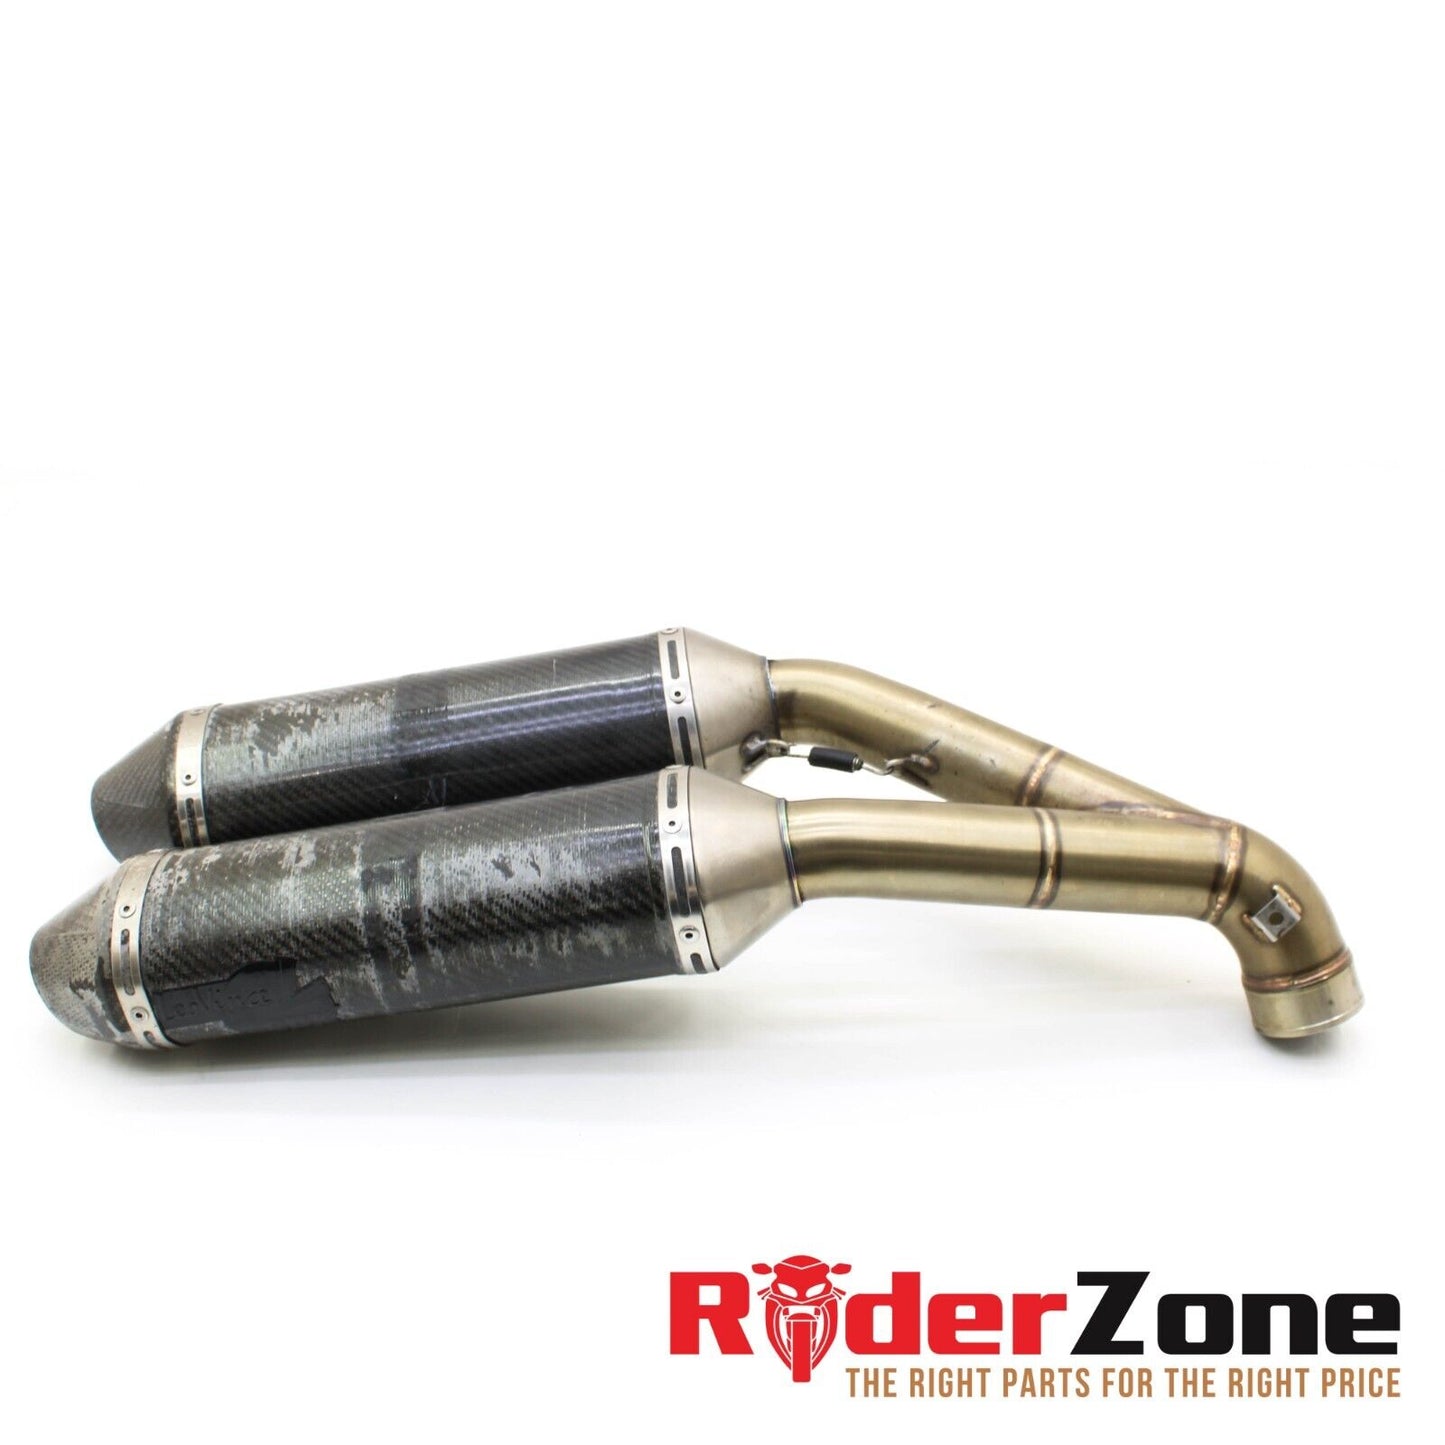 2008 - 2013 DUCATI 848 EVO LEOVINCE EXHAUST CARBON CANS MUFFLERS FULL SYSTEM